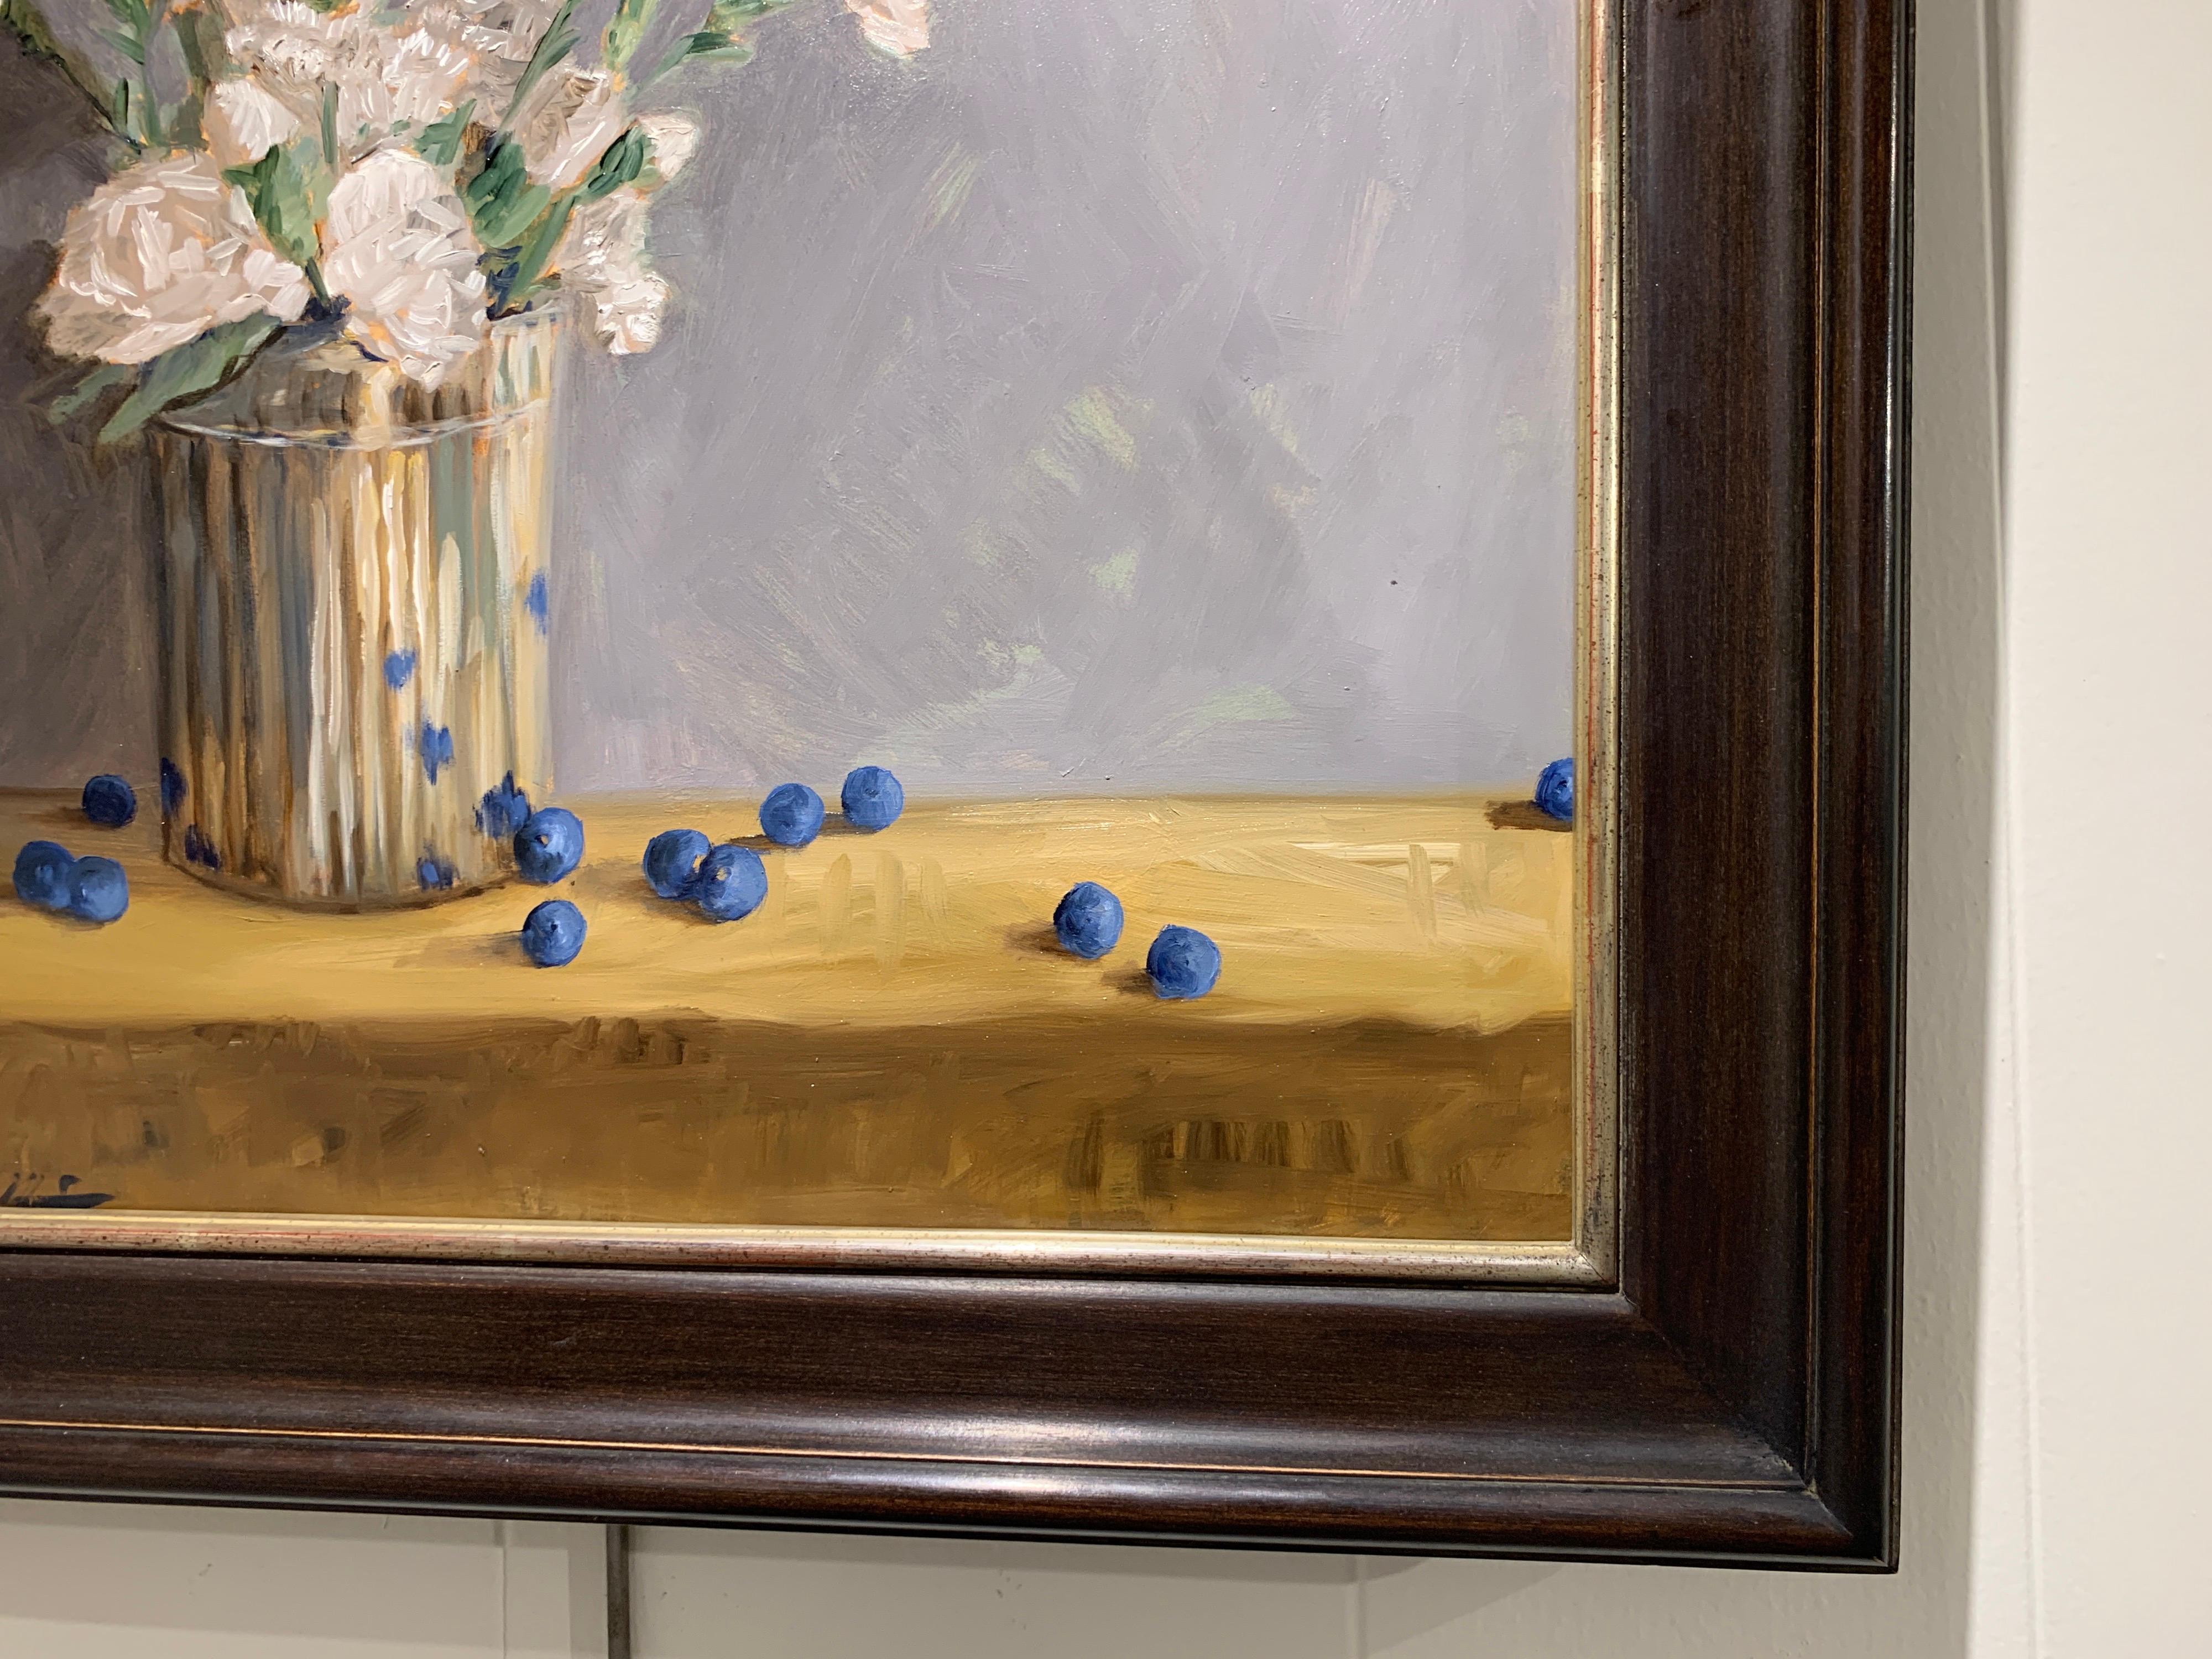 Still Life with Carnations and Blueberries by Ginny Williams, Framed Realist Art 2